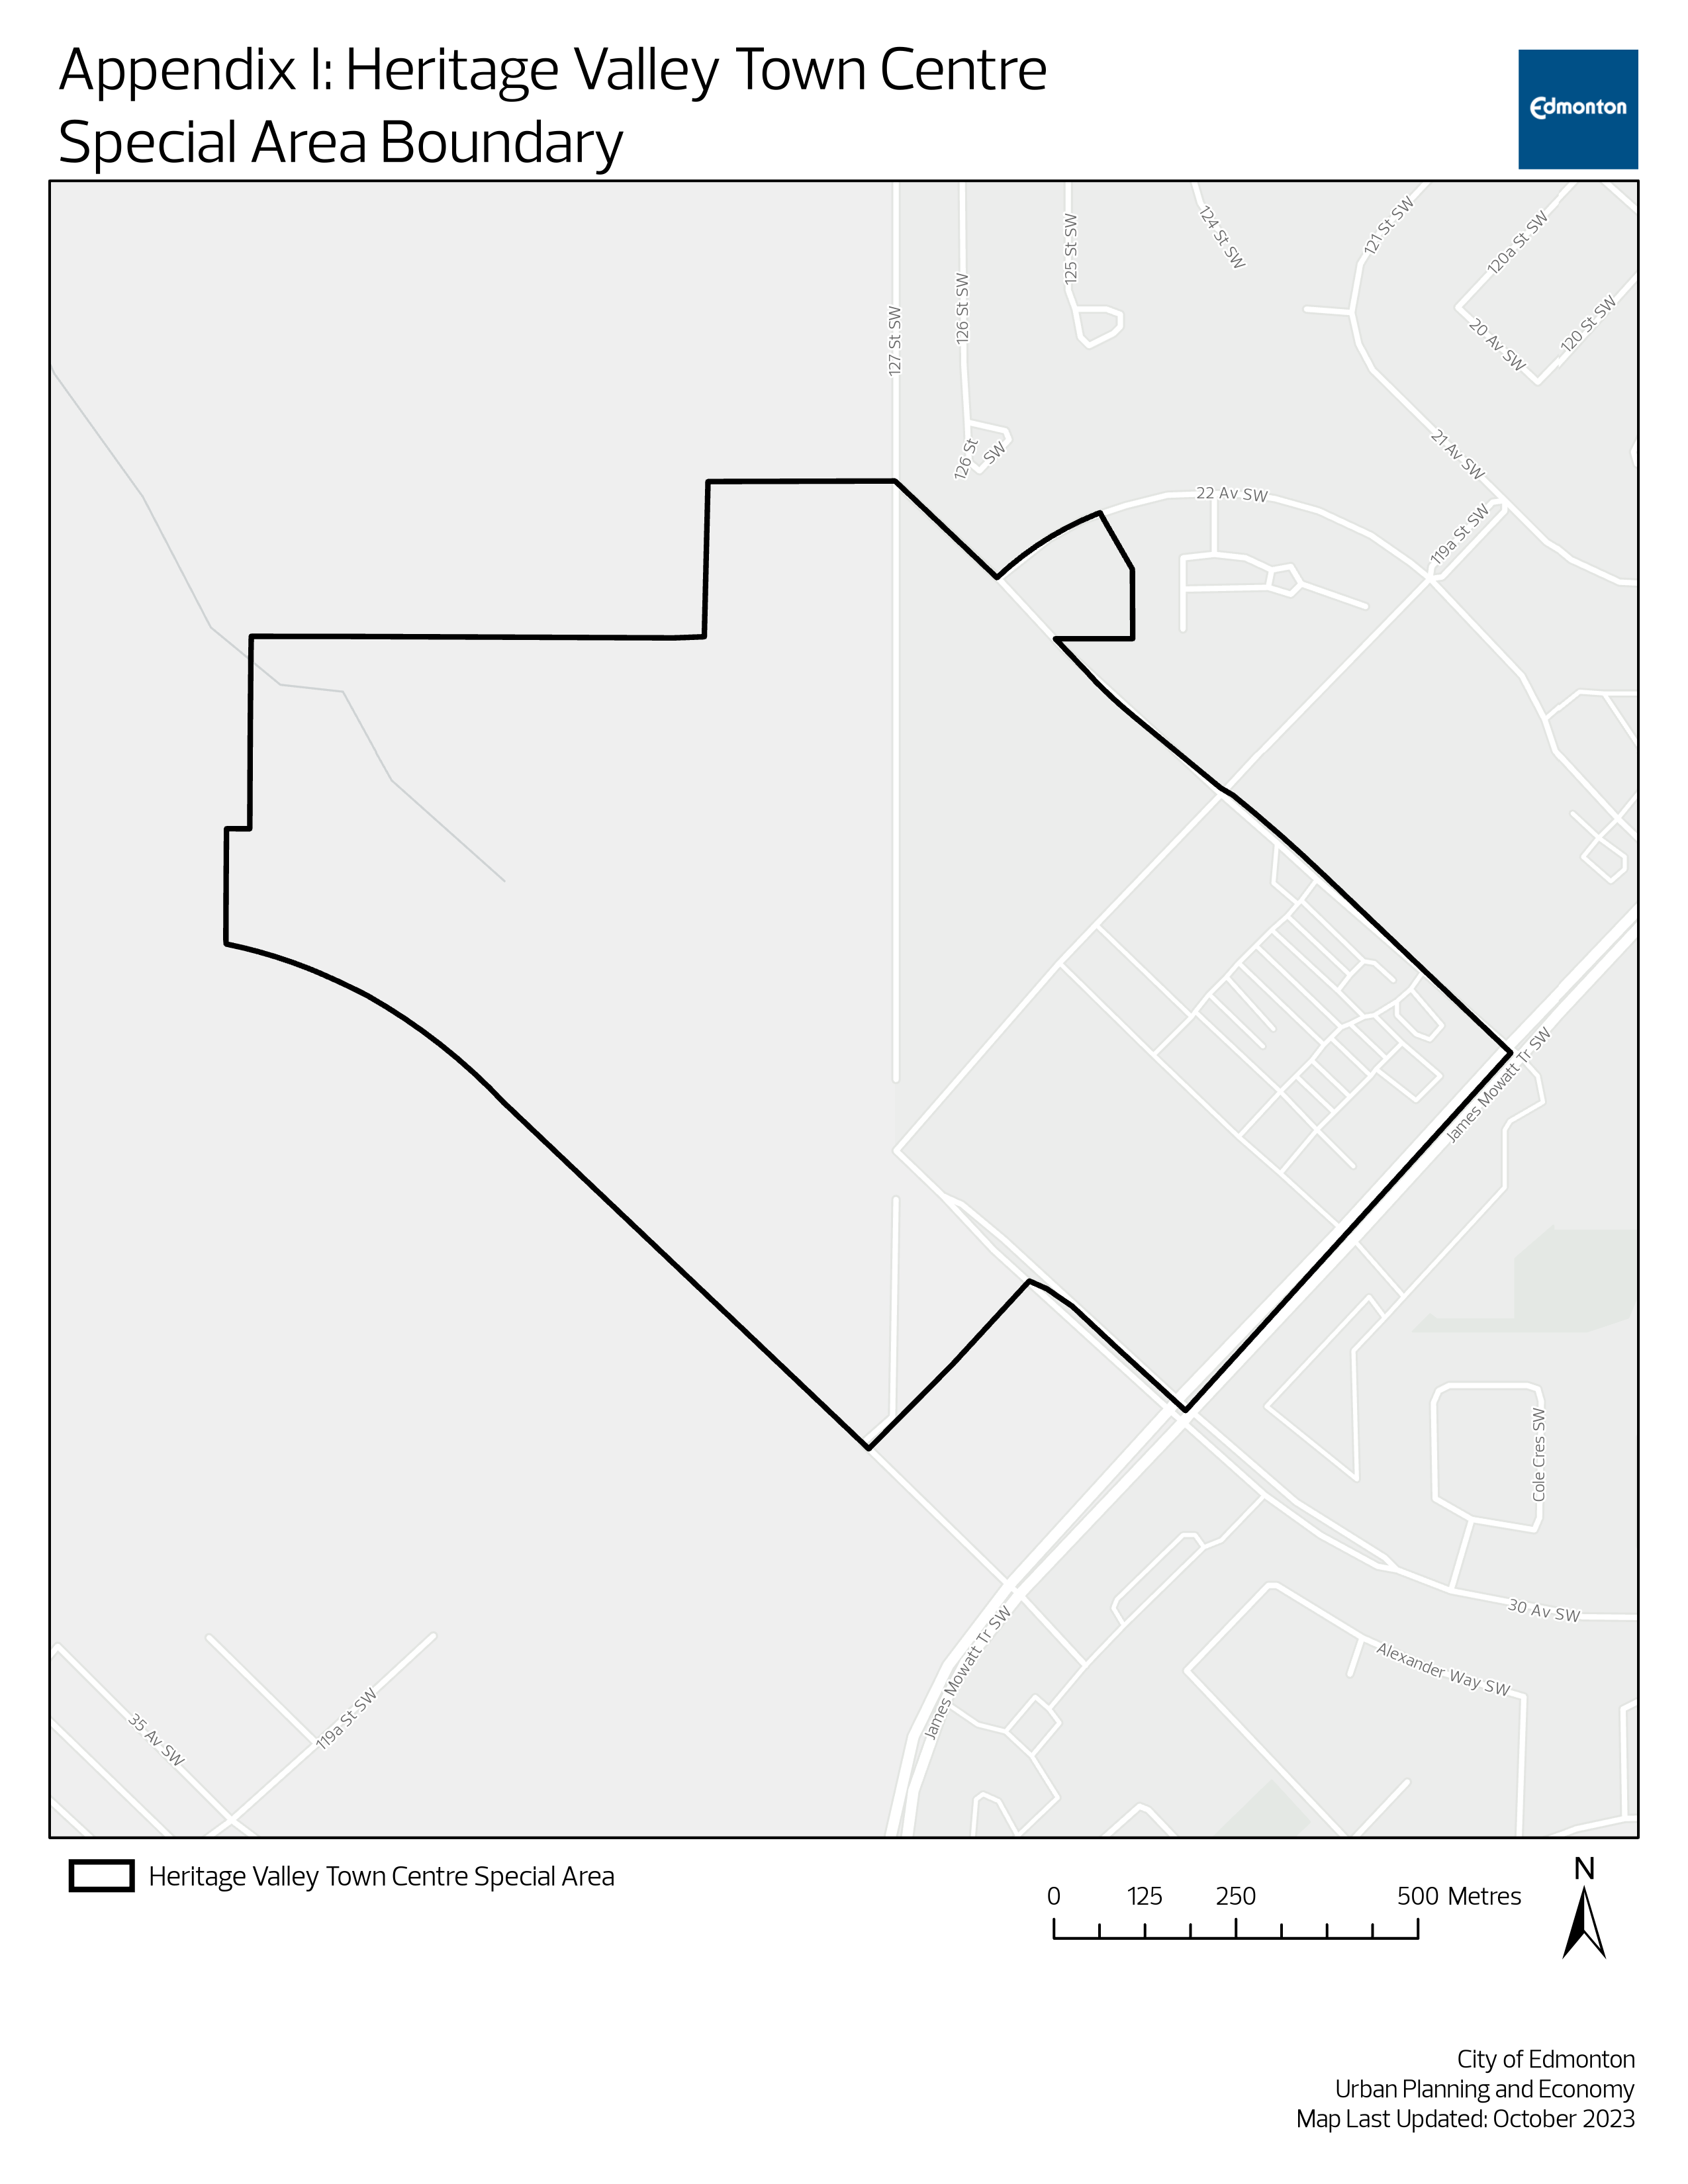 Heritage Valley Town Centre Special Area boundary map